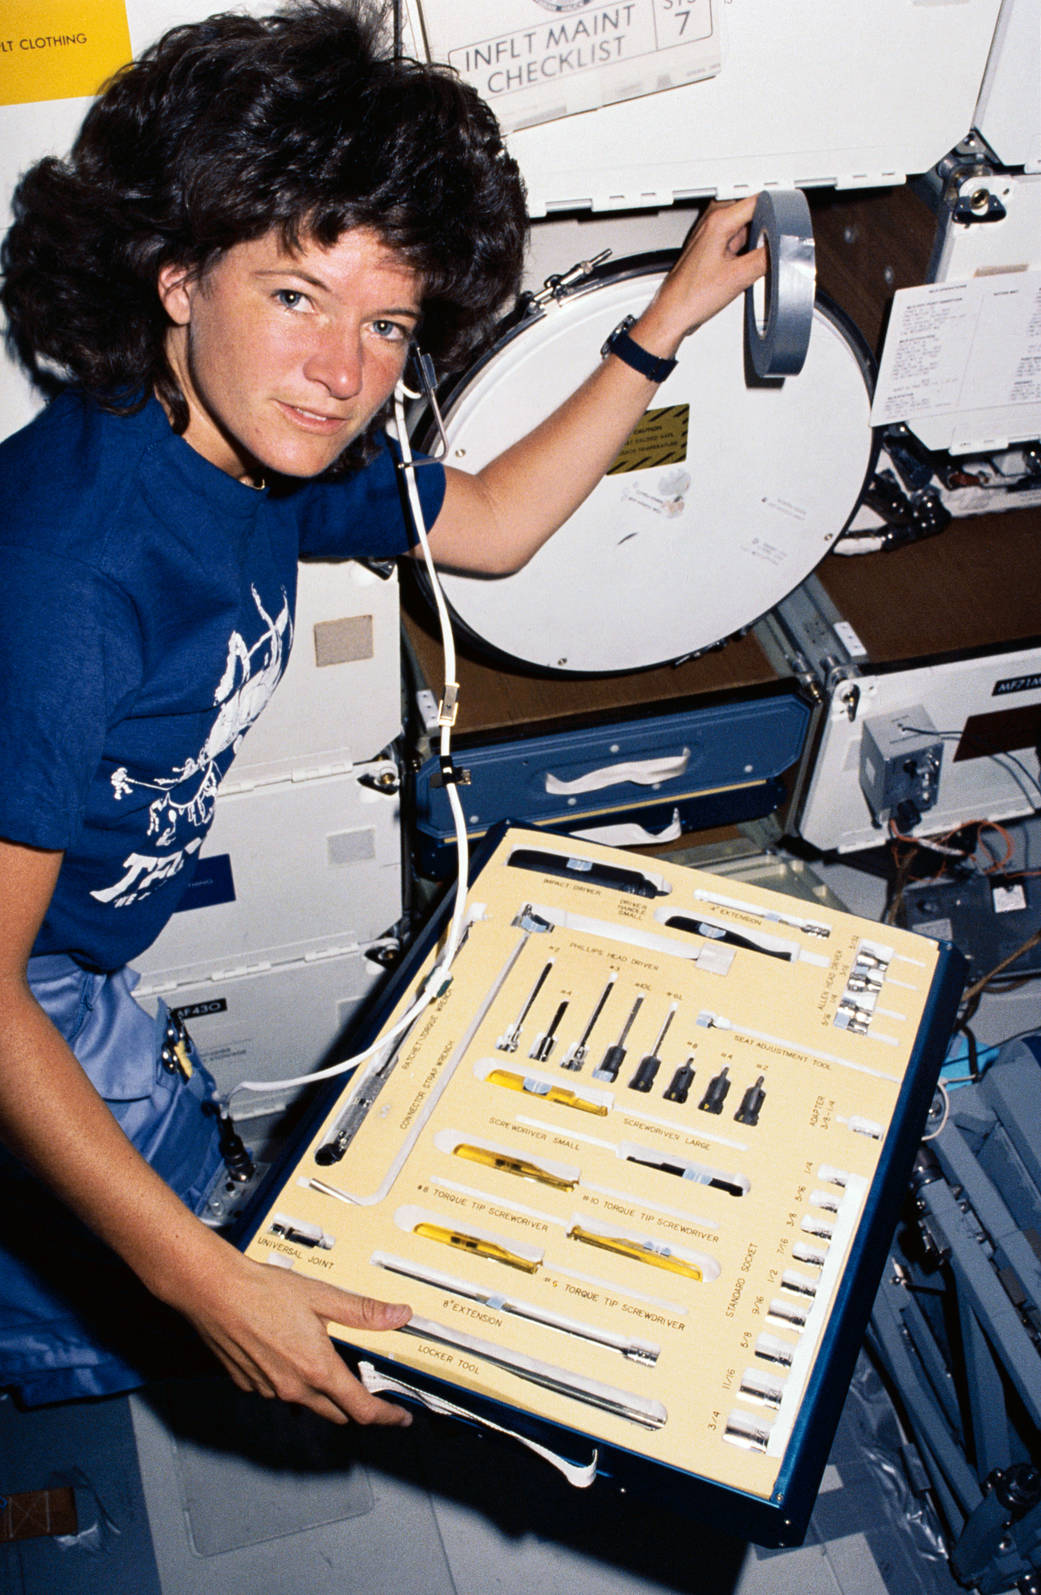 Astronaut Sally Ride holding toolkit during the STS-7 mission aboard shuttle Challenger